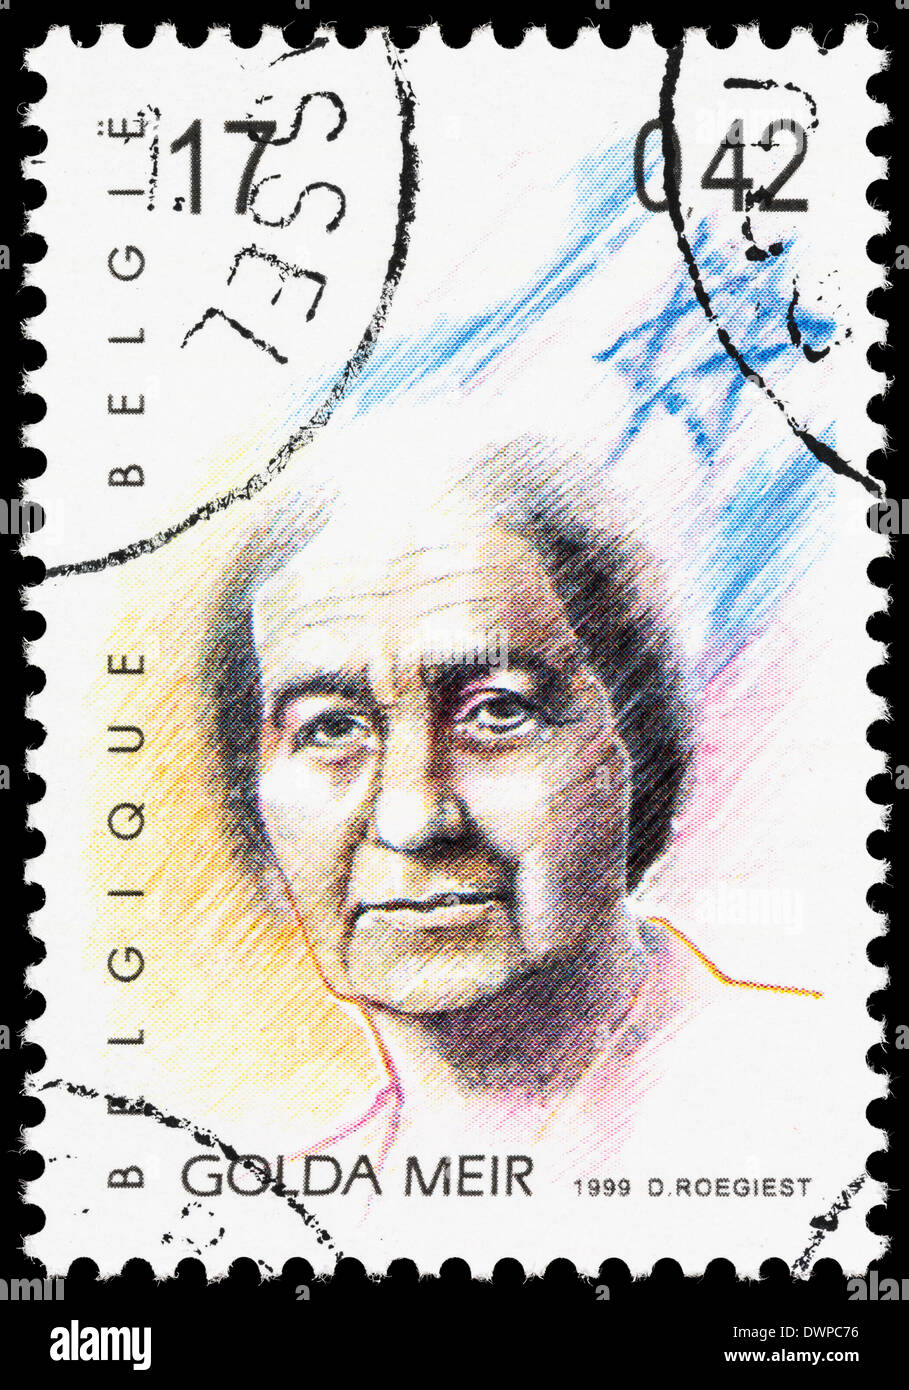 Belgium postage stamp with an illustration of Golda Meir. Stock Photo